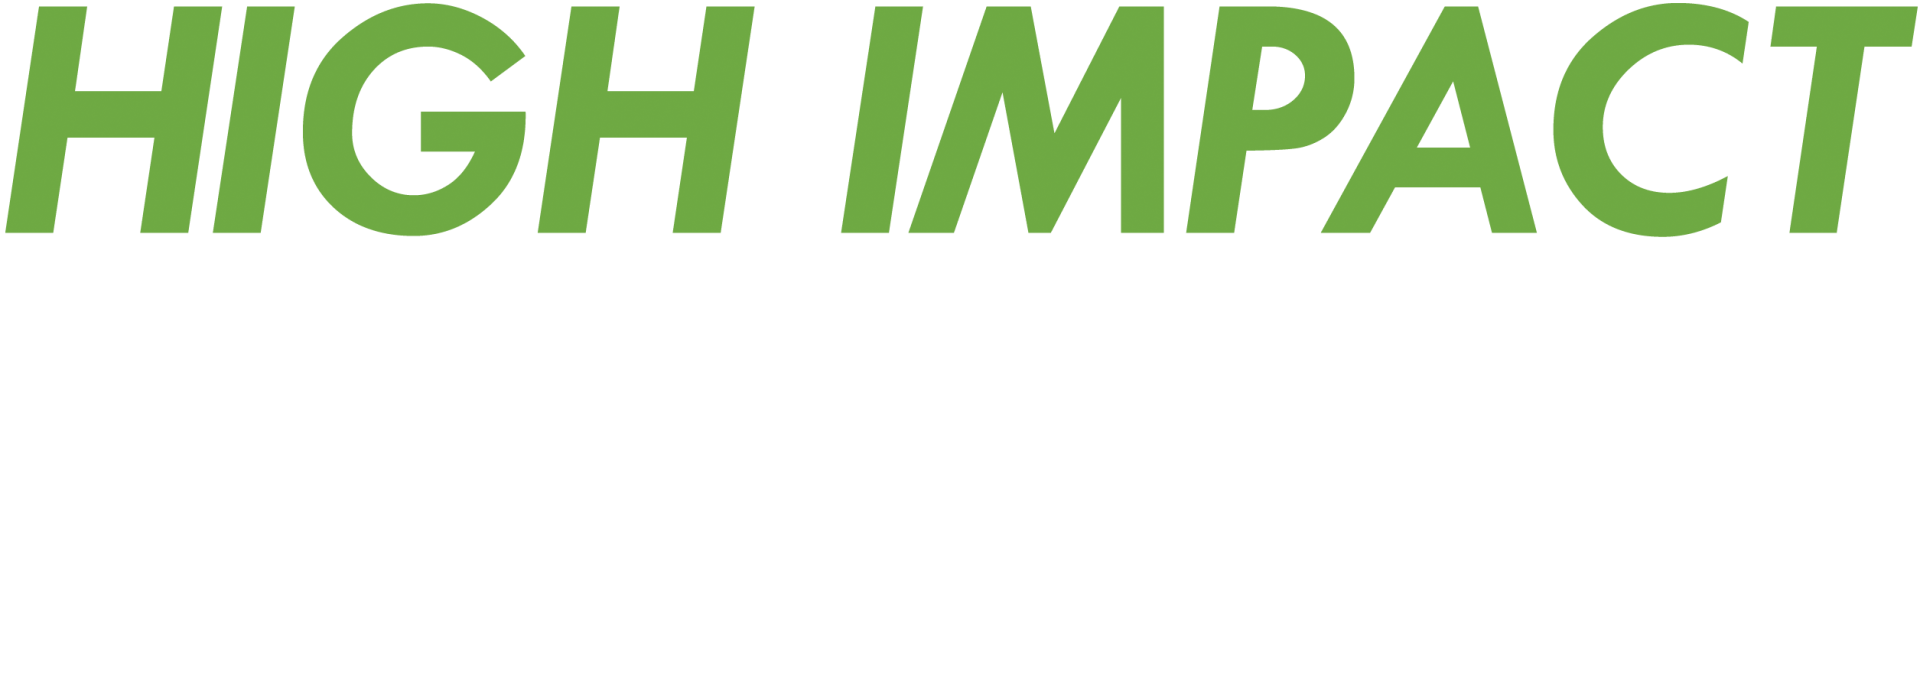 High Impact Glass Solutions